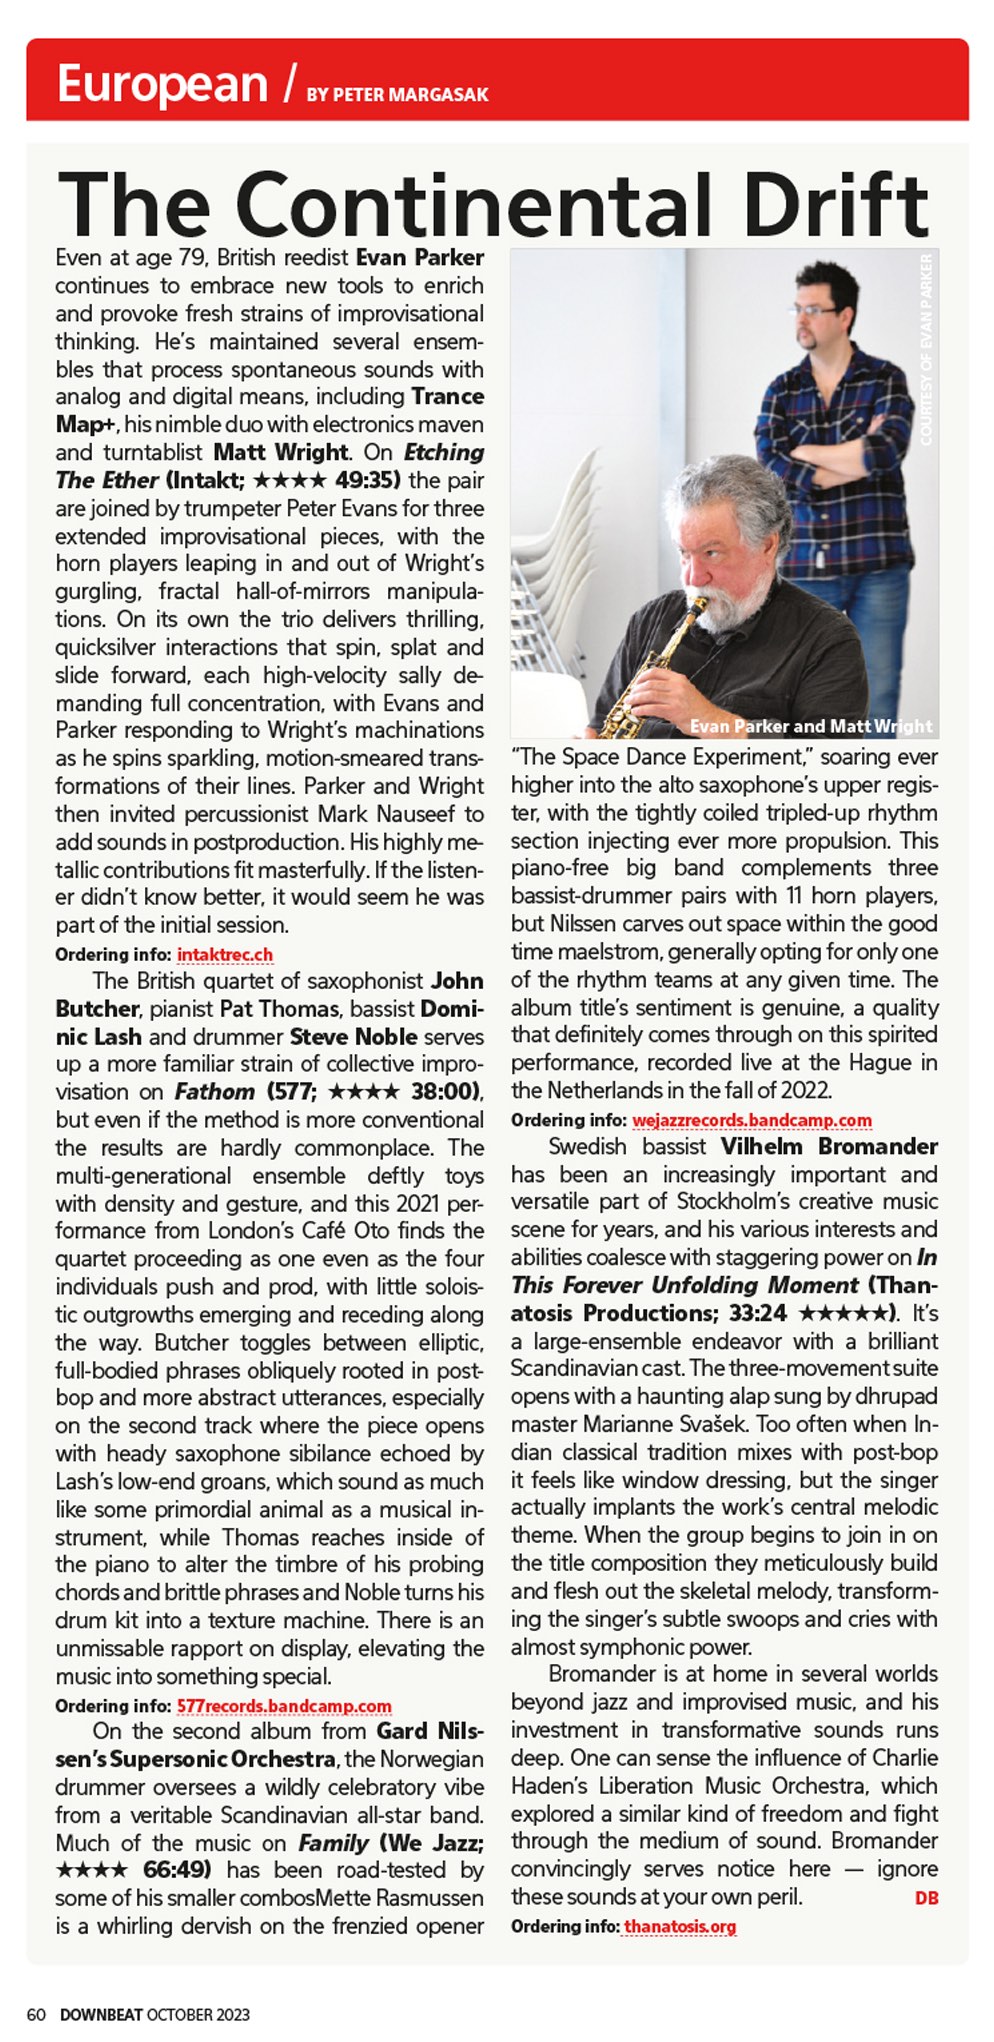 Even at age 79, British reedist Evan Parker
			continues to embrace new tools to enrich
			and provoke fresh strains of improvisational
			thinking. He's maintained several ensem-
			bles that process spontaneous sounds with
			analog and digital means, including Trance
			Map+, his nimble duo with electronics maven
			and turntablist Matt Wright. On Etching
			The Ether (Intakt: **** 49:35) the pair
			are joined by trumpeter Peter Evans for three
			extended improvisational pieces, with the
			horn players leaping in and out of Wright's
			gurgling, fractal hal-of-mirrors manipula-
			tions.